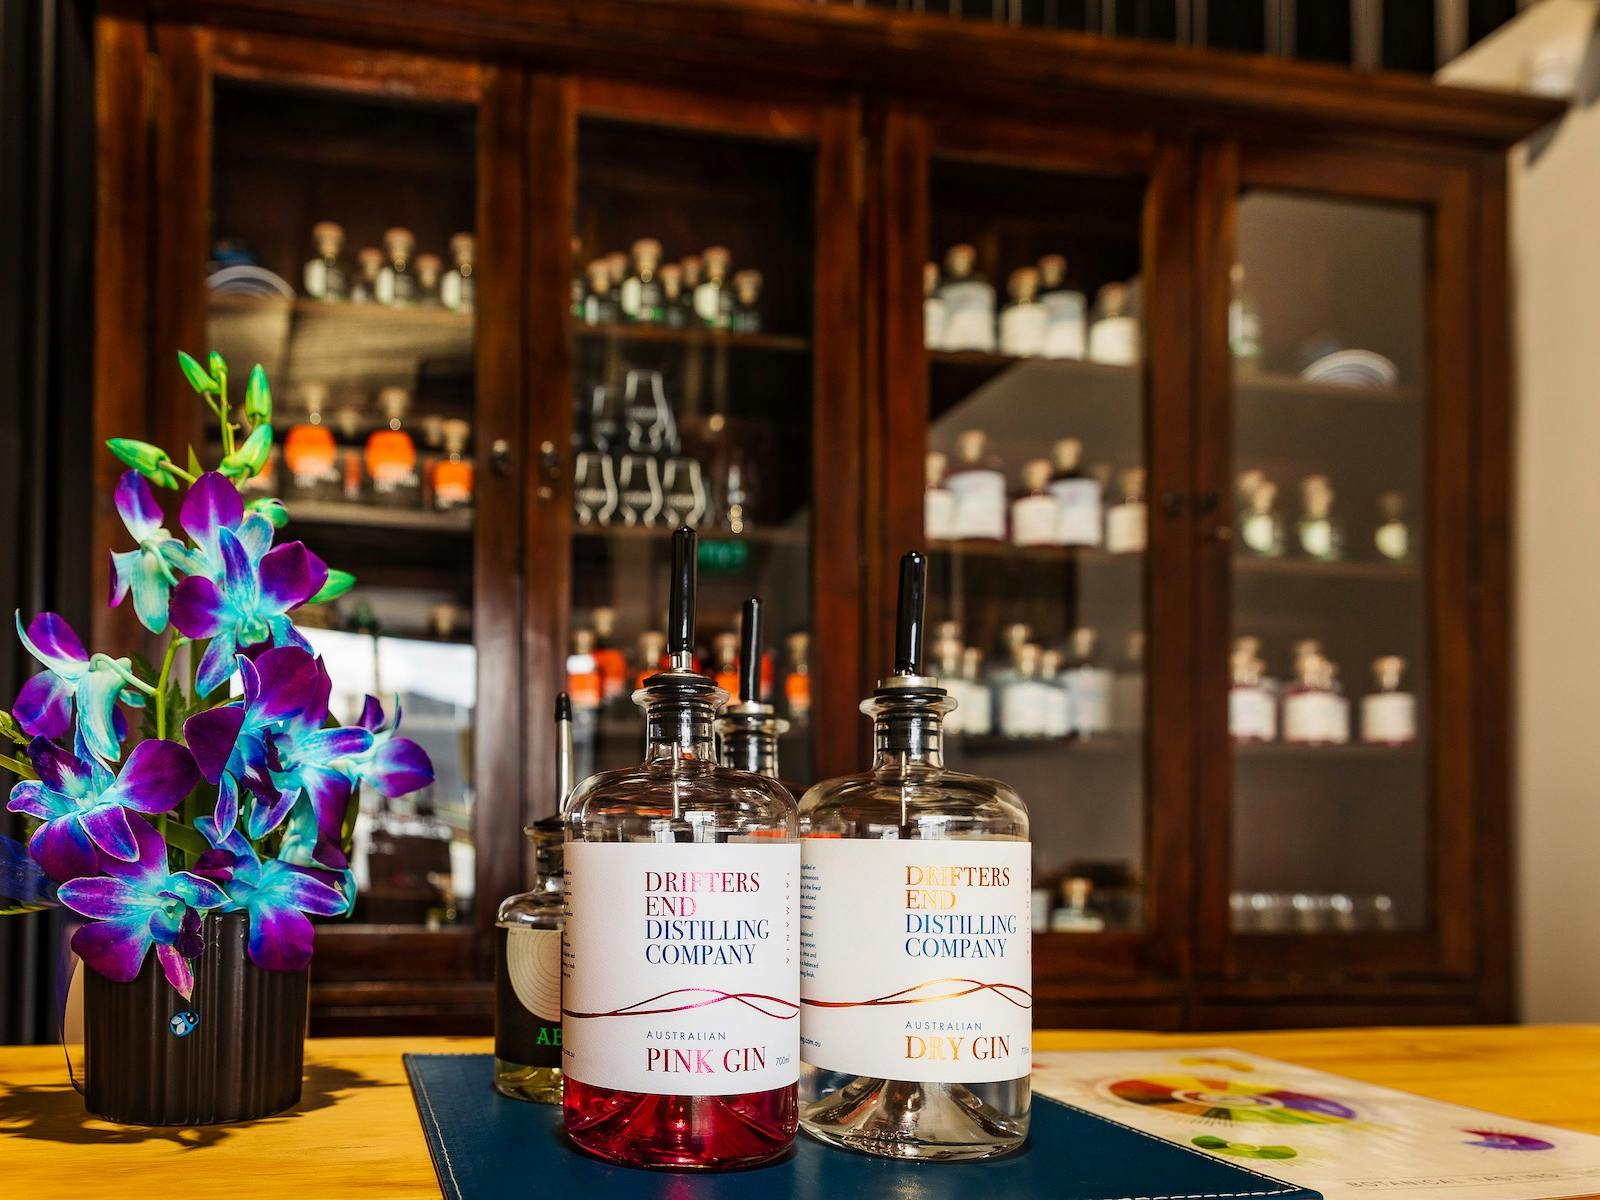 Drifters End Distilling Company Australian Dry and Pink Gins